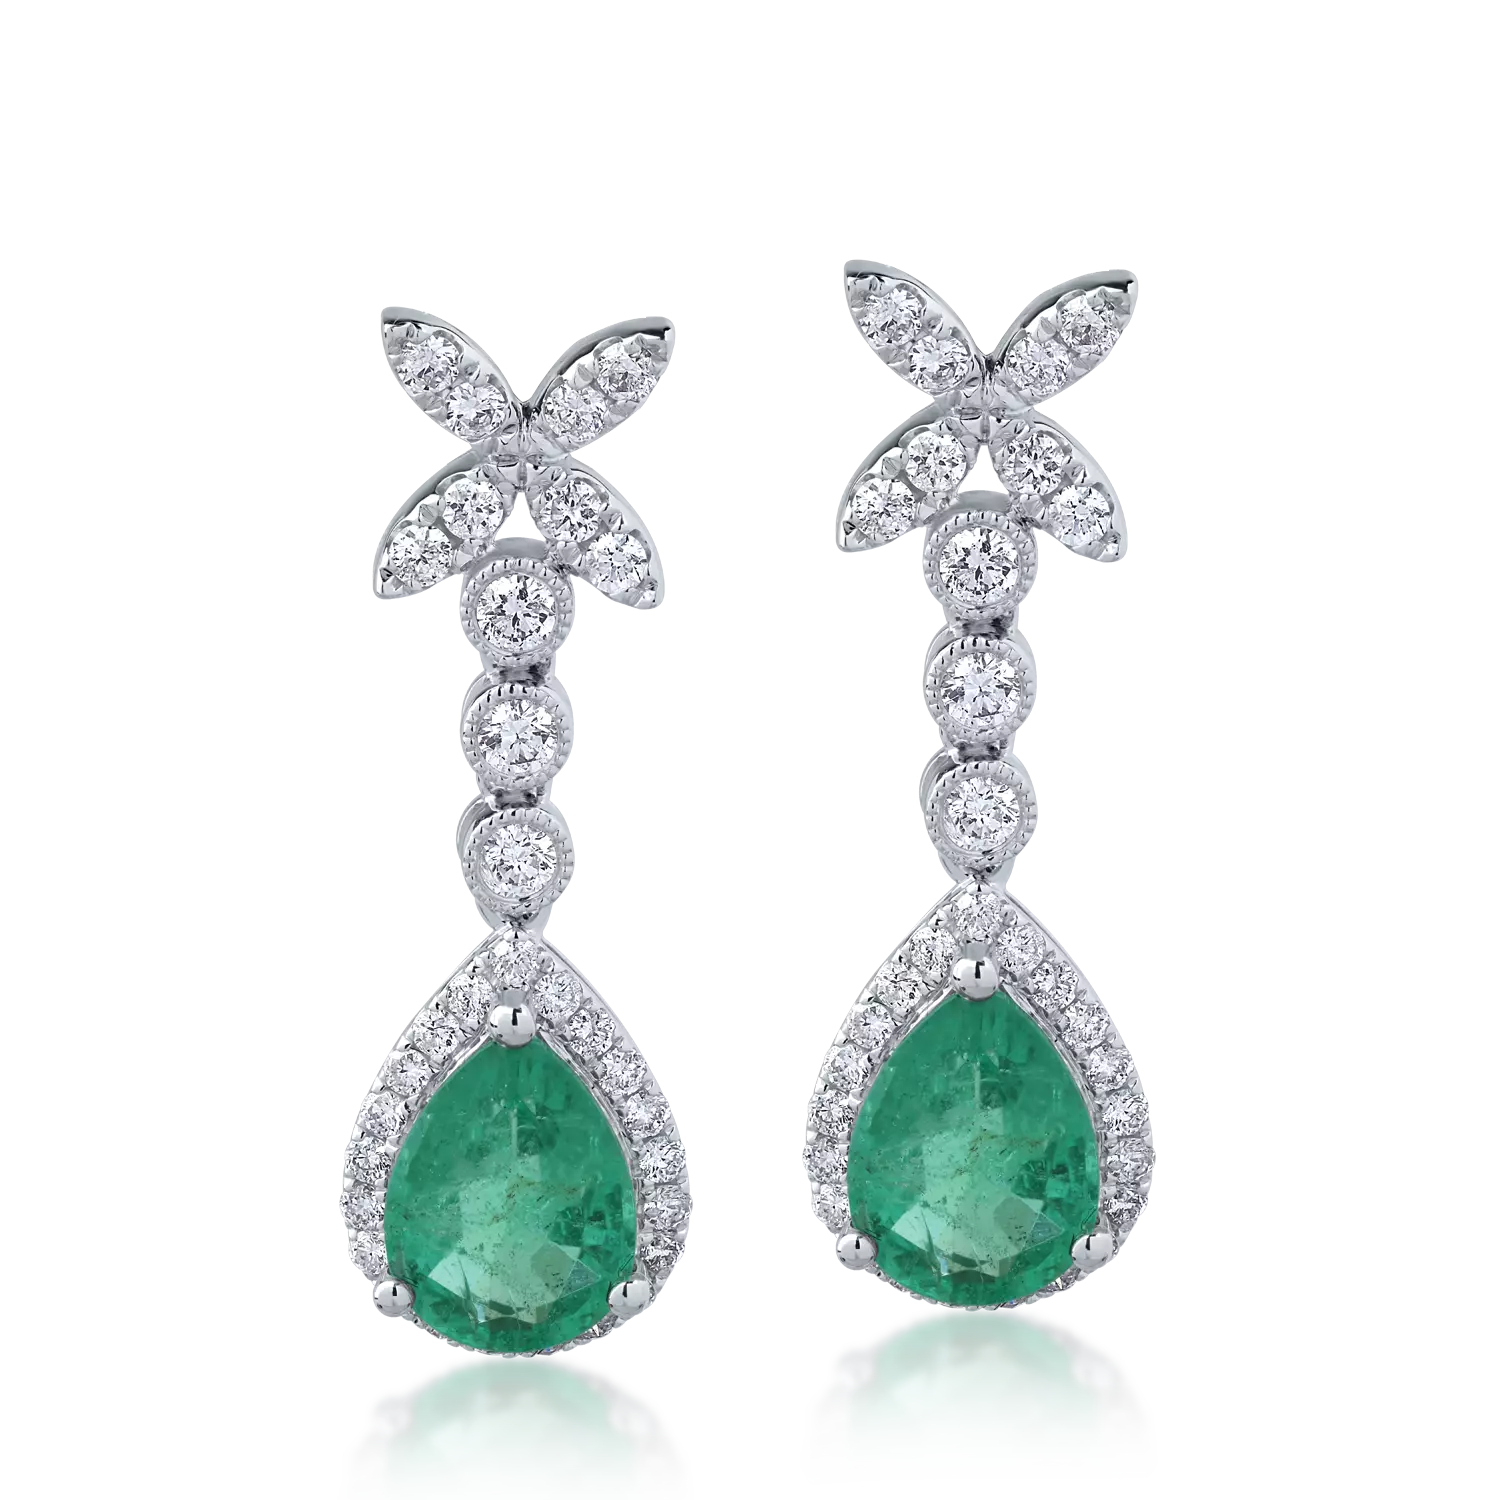 18K white gold earrings with 2ct emeralds and 0.6ct diamonds